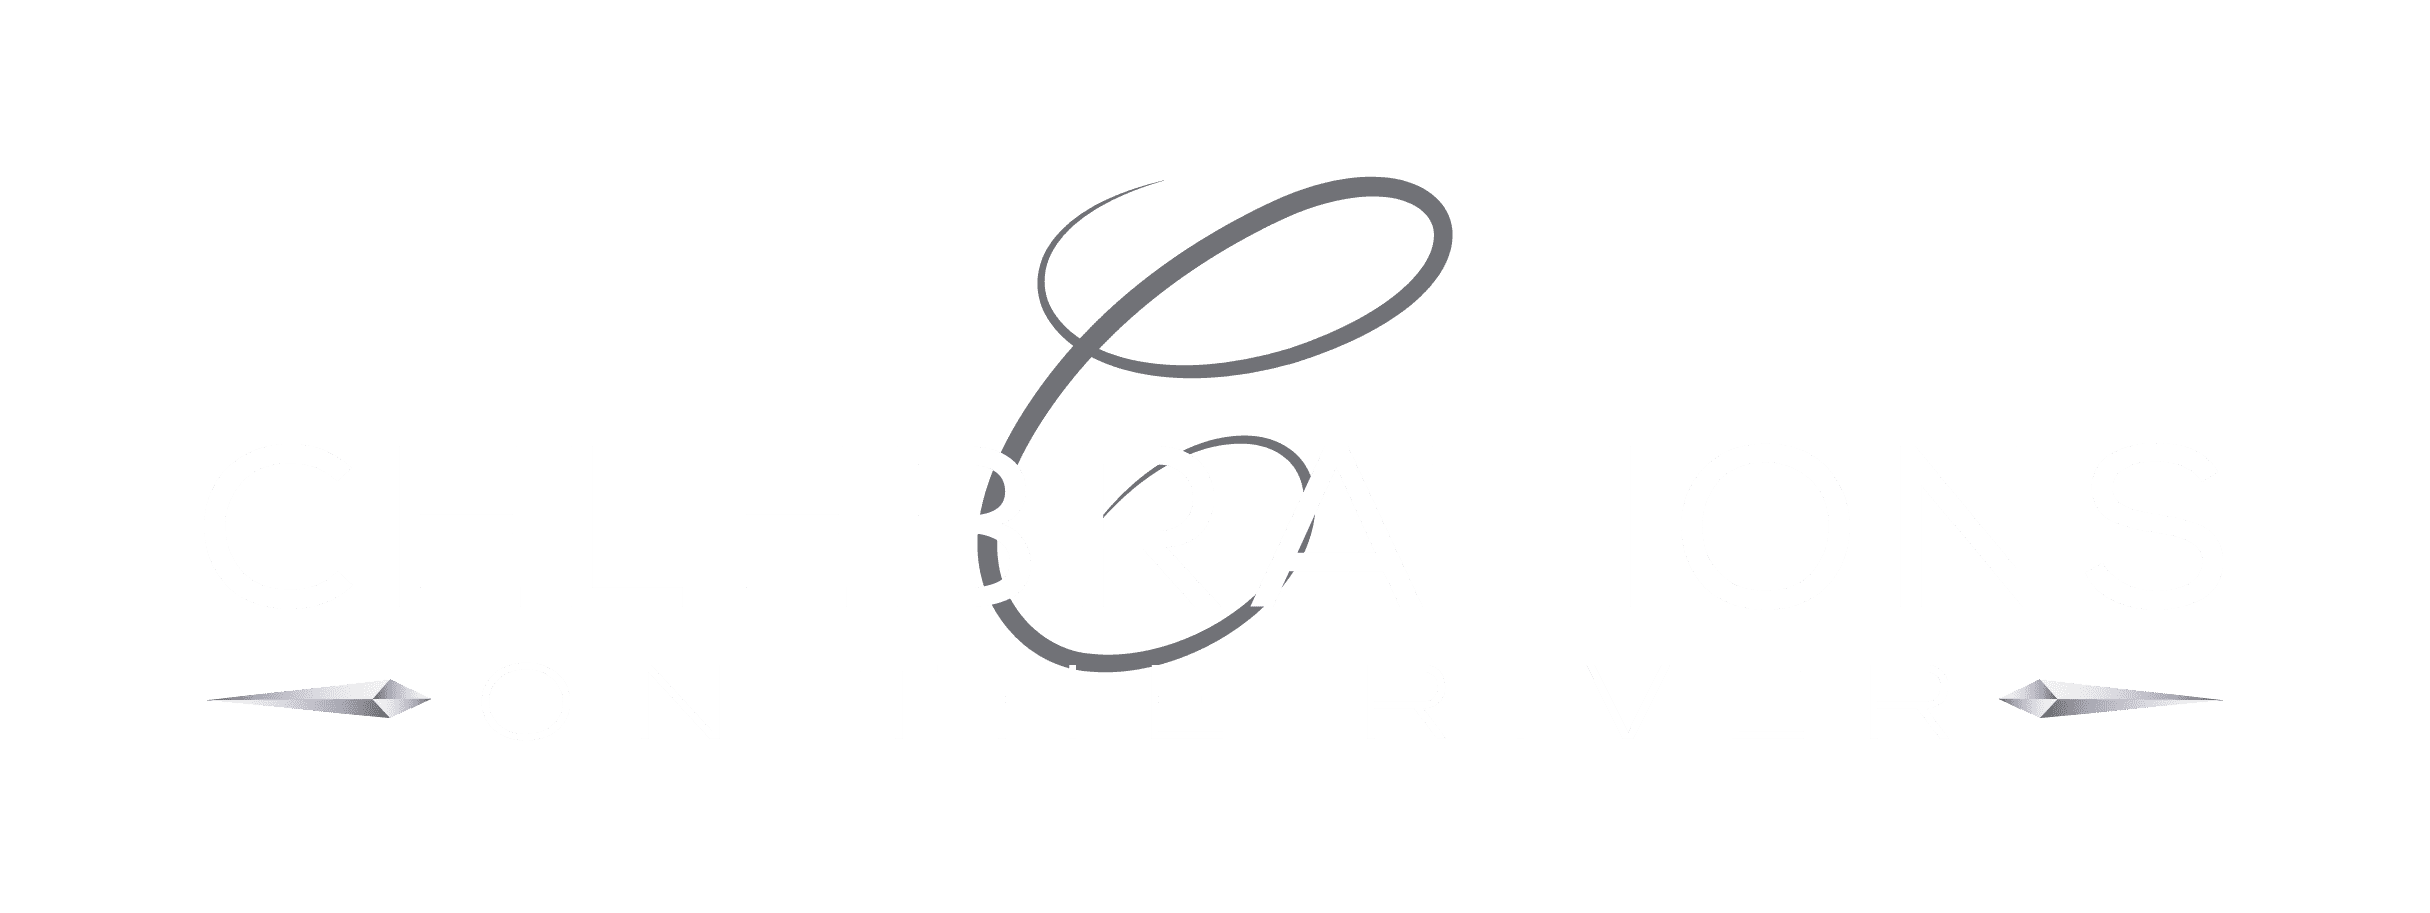 A green background with the word celebration in white.